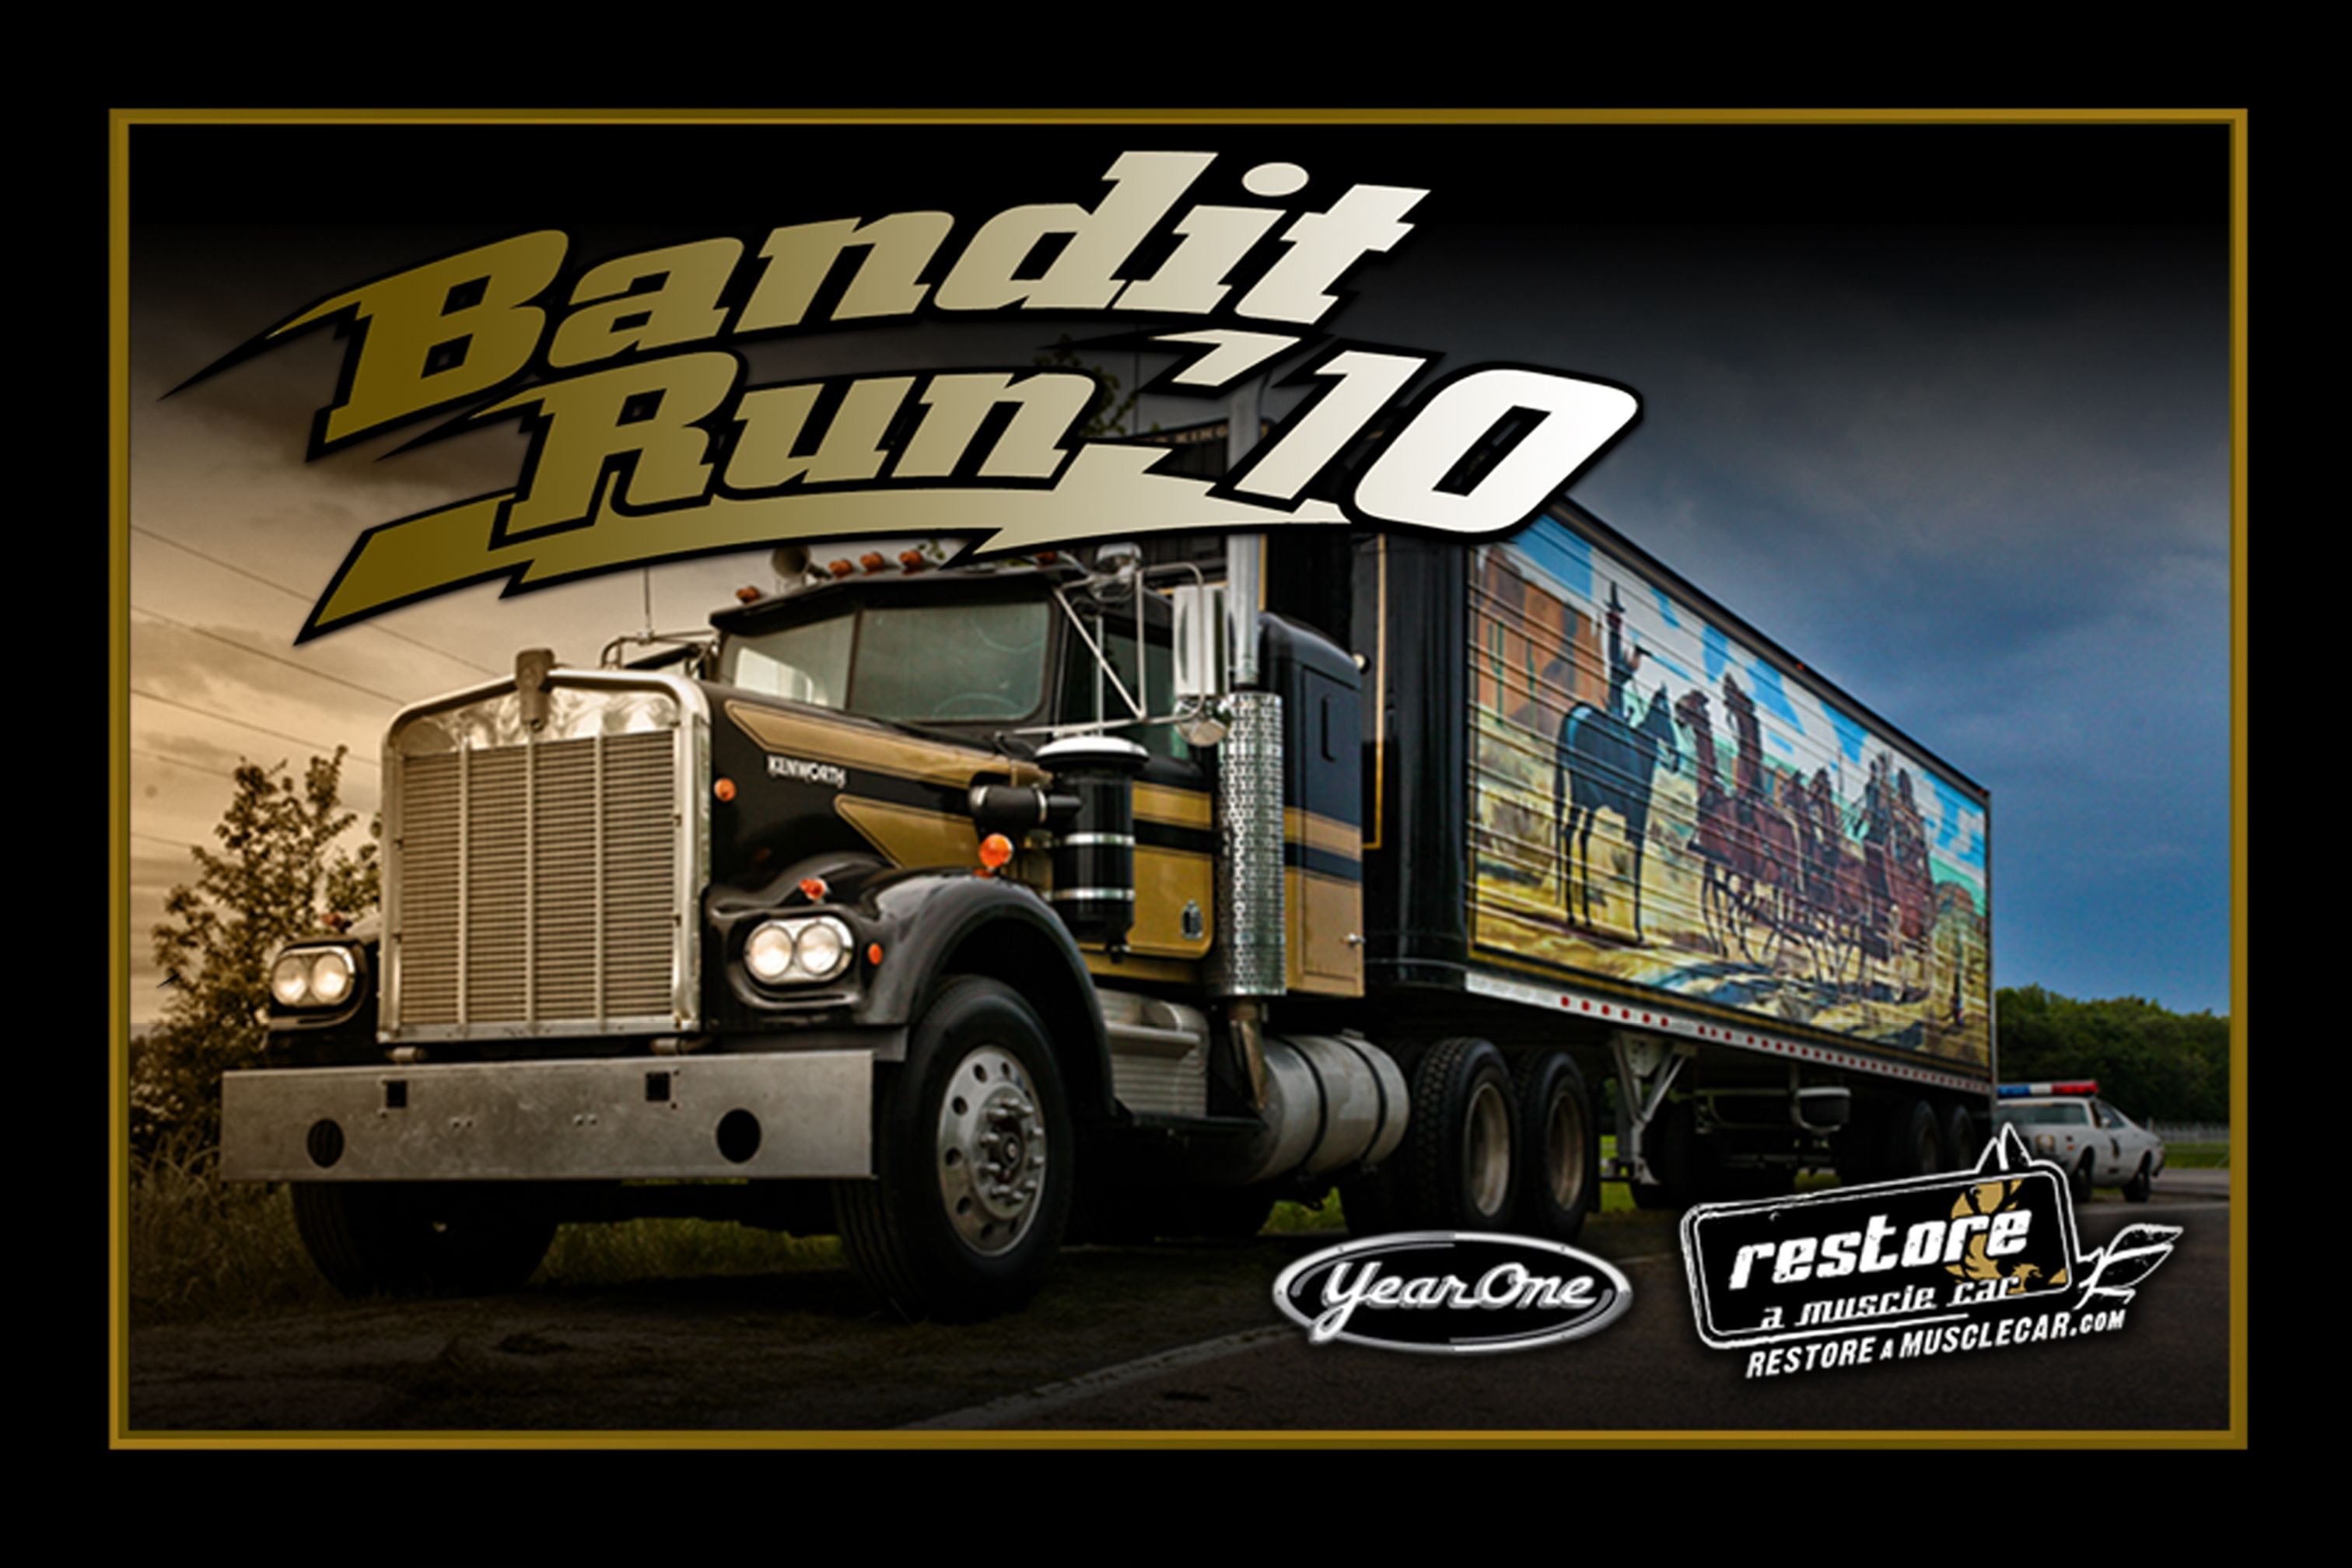 Smokey and the Bandit iPhone Wallpaper. Clean Bandit Wallpaper, Bandit Wallpaper and Bandit 1200 Wallpaper